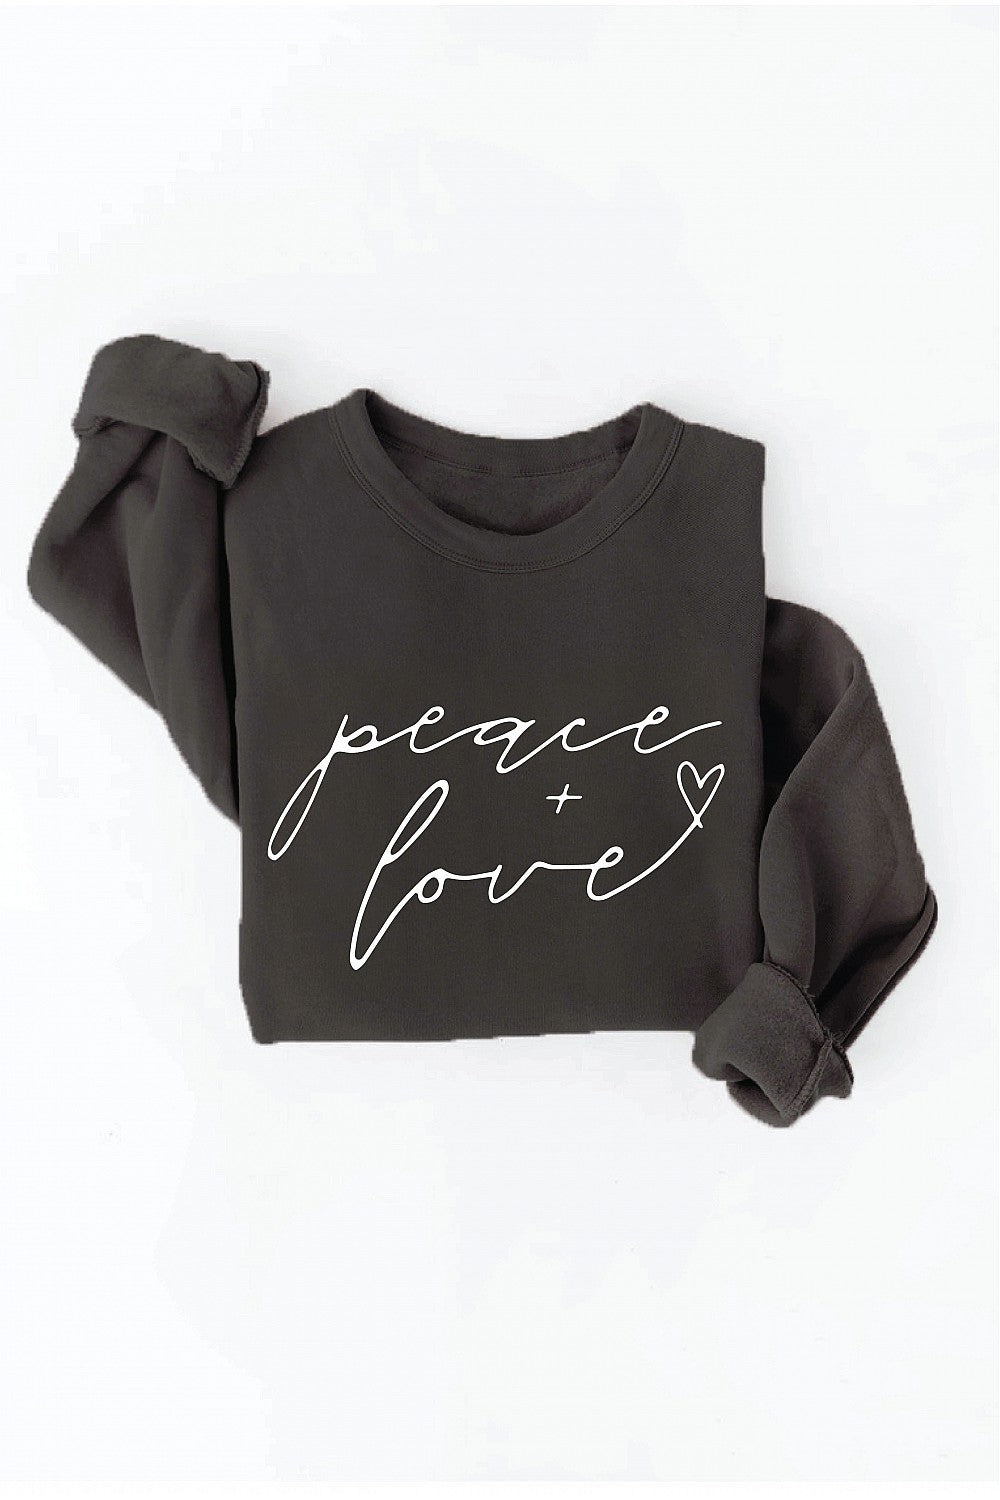  52% cotton / 40% polyester / 8% rayon  Peace & Love-spread the love with this ultra comfy fleecy pullover! Featuring a ribbed cuff & crew neck, it's great for layering or rocking solo. Psst: Check the size guide on the chest for the perfect fit.